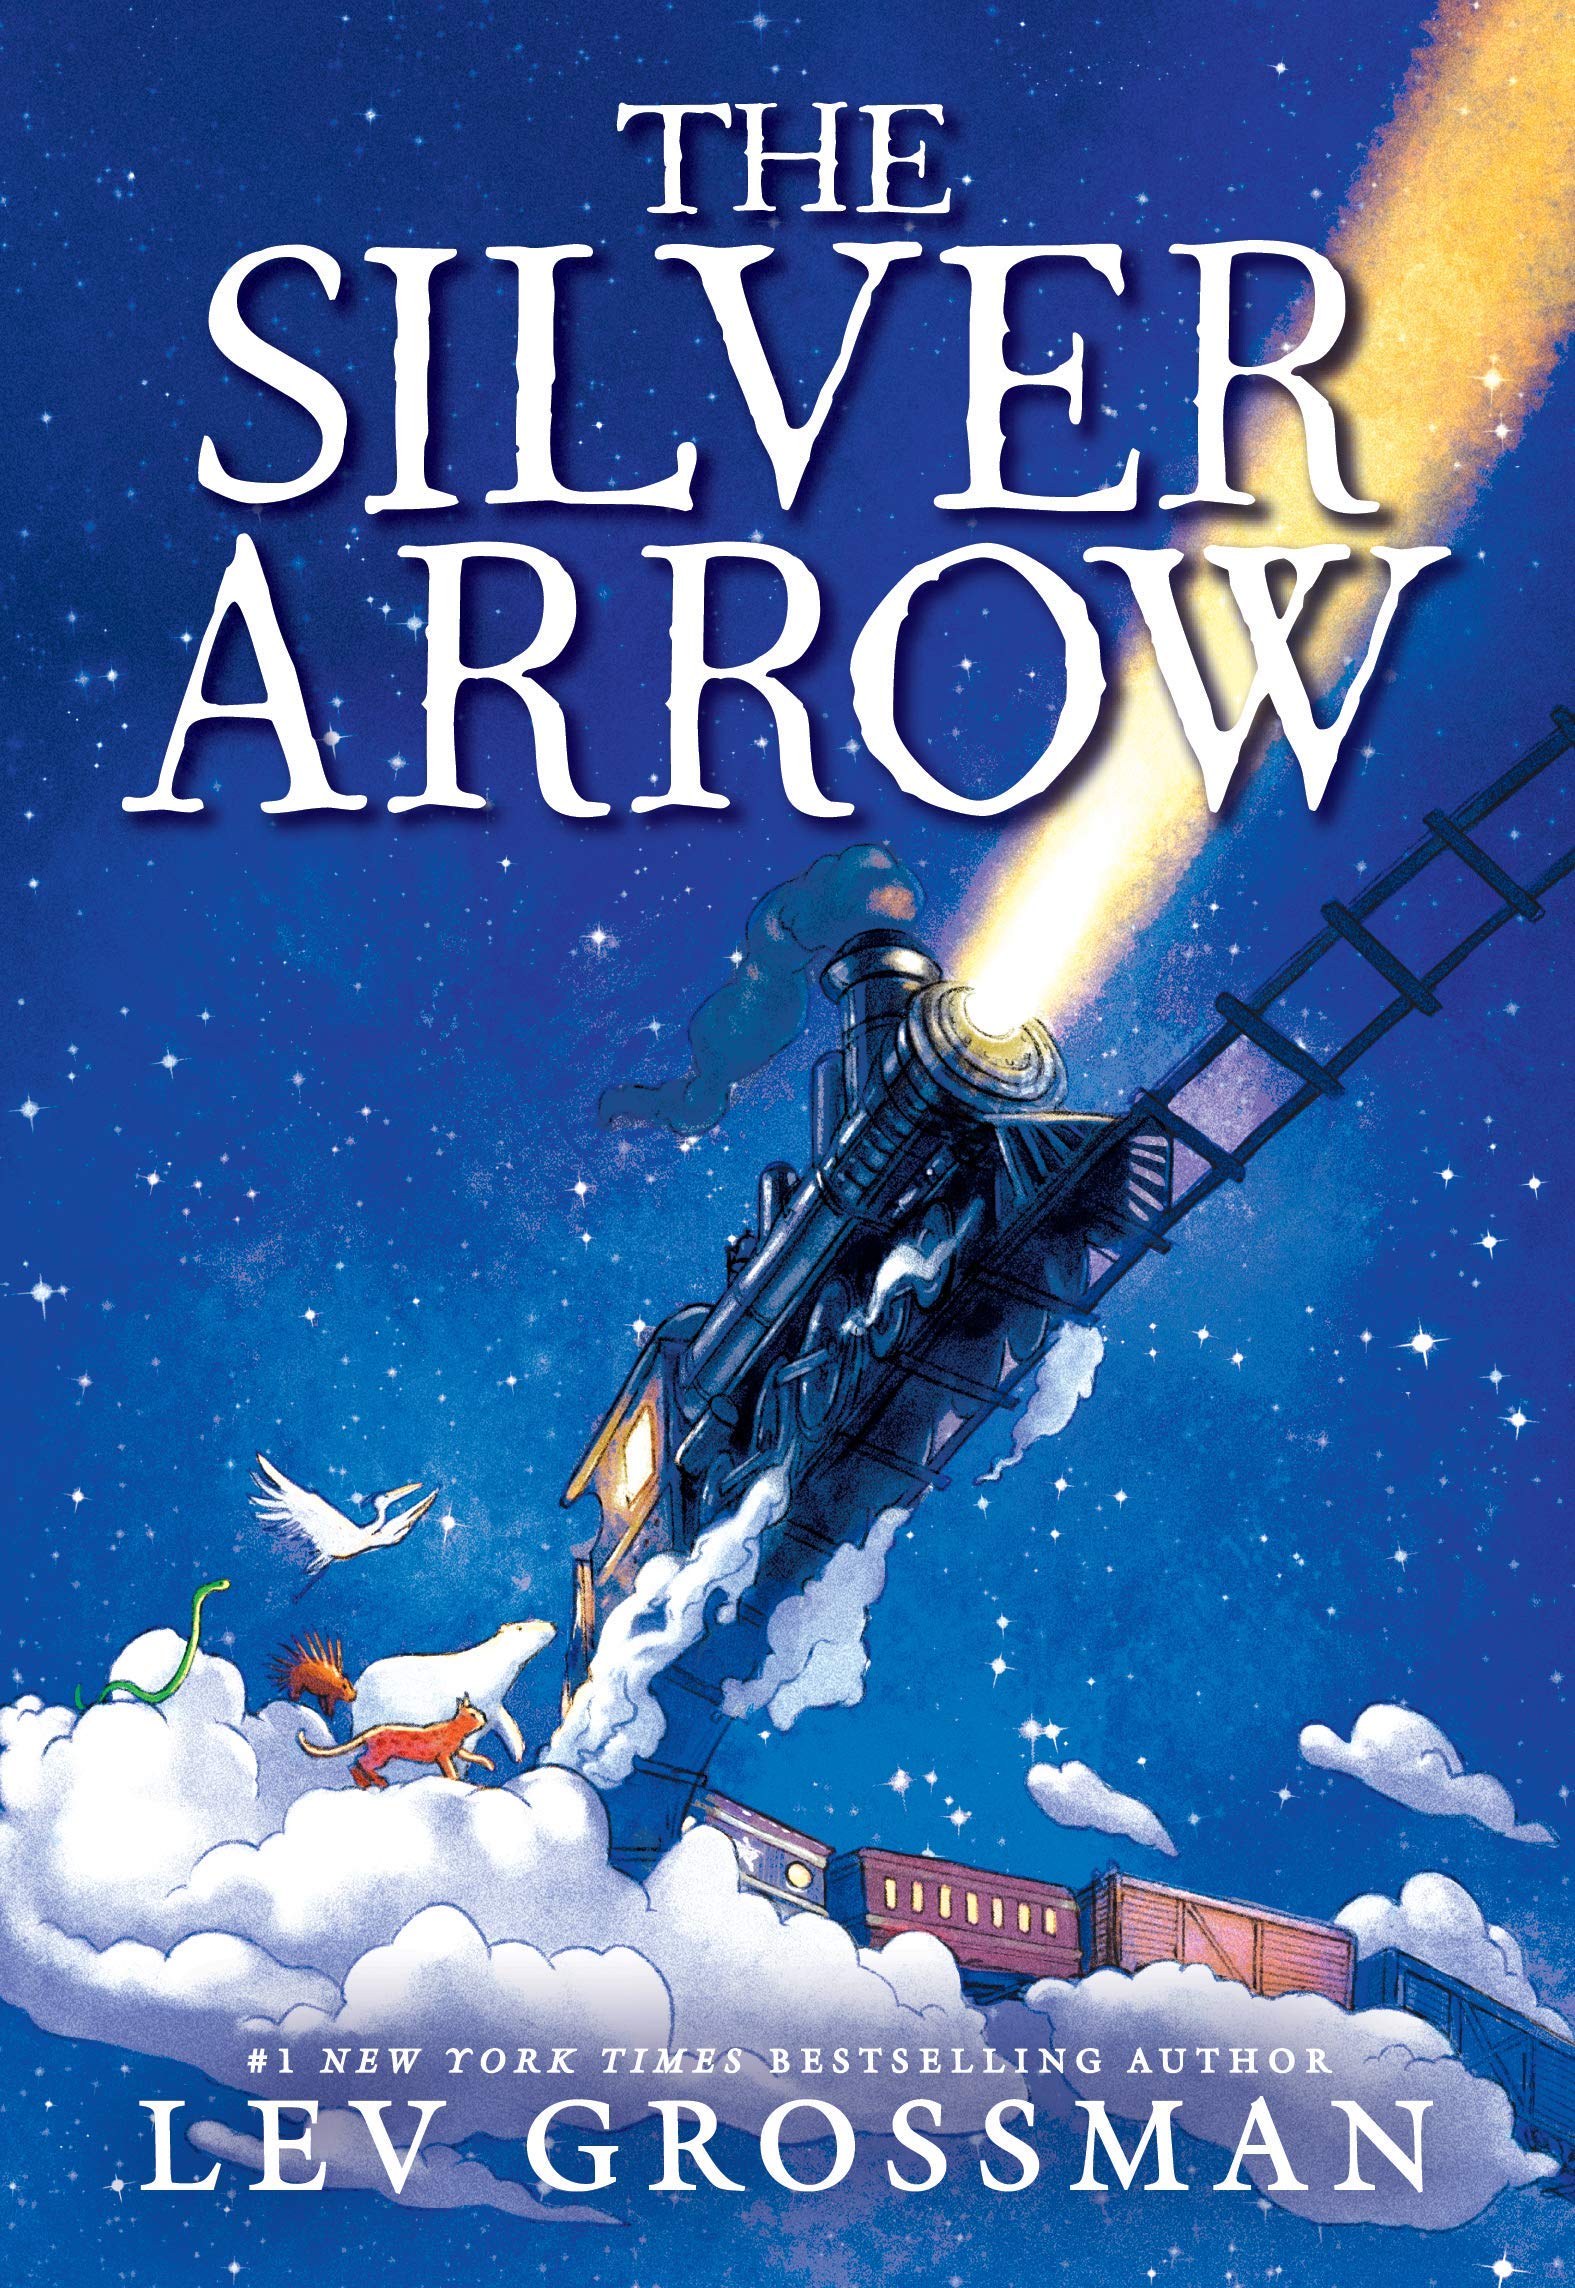 Image for "The Silver Arrow"